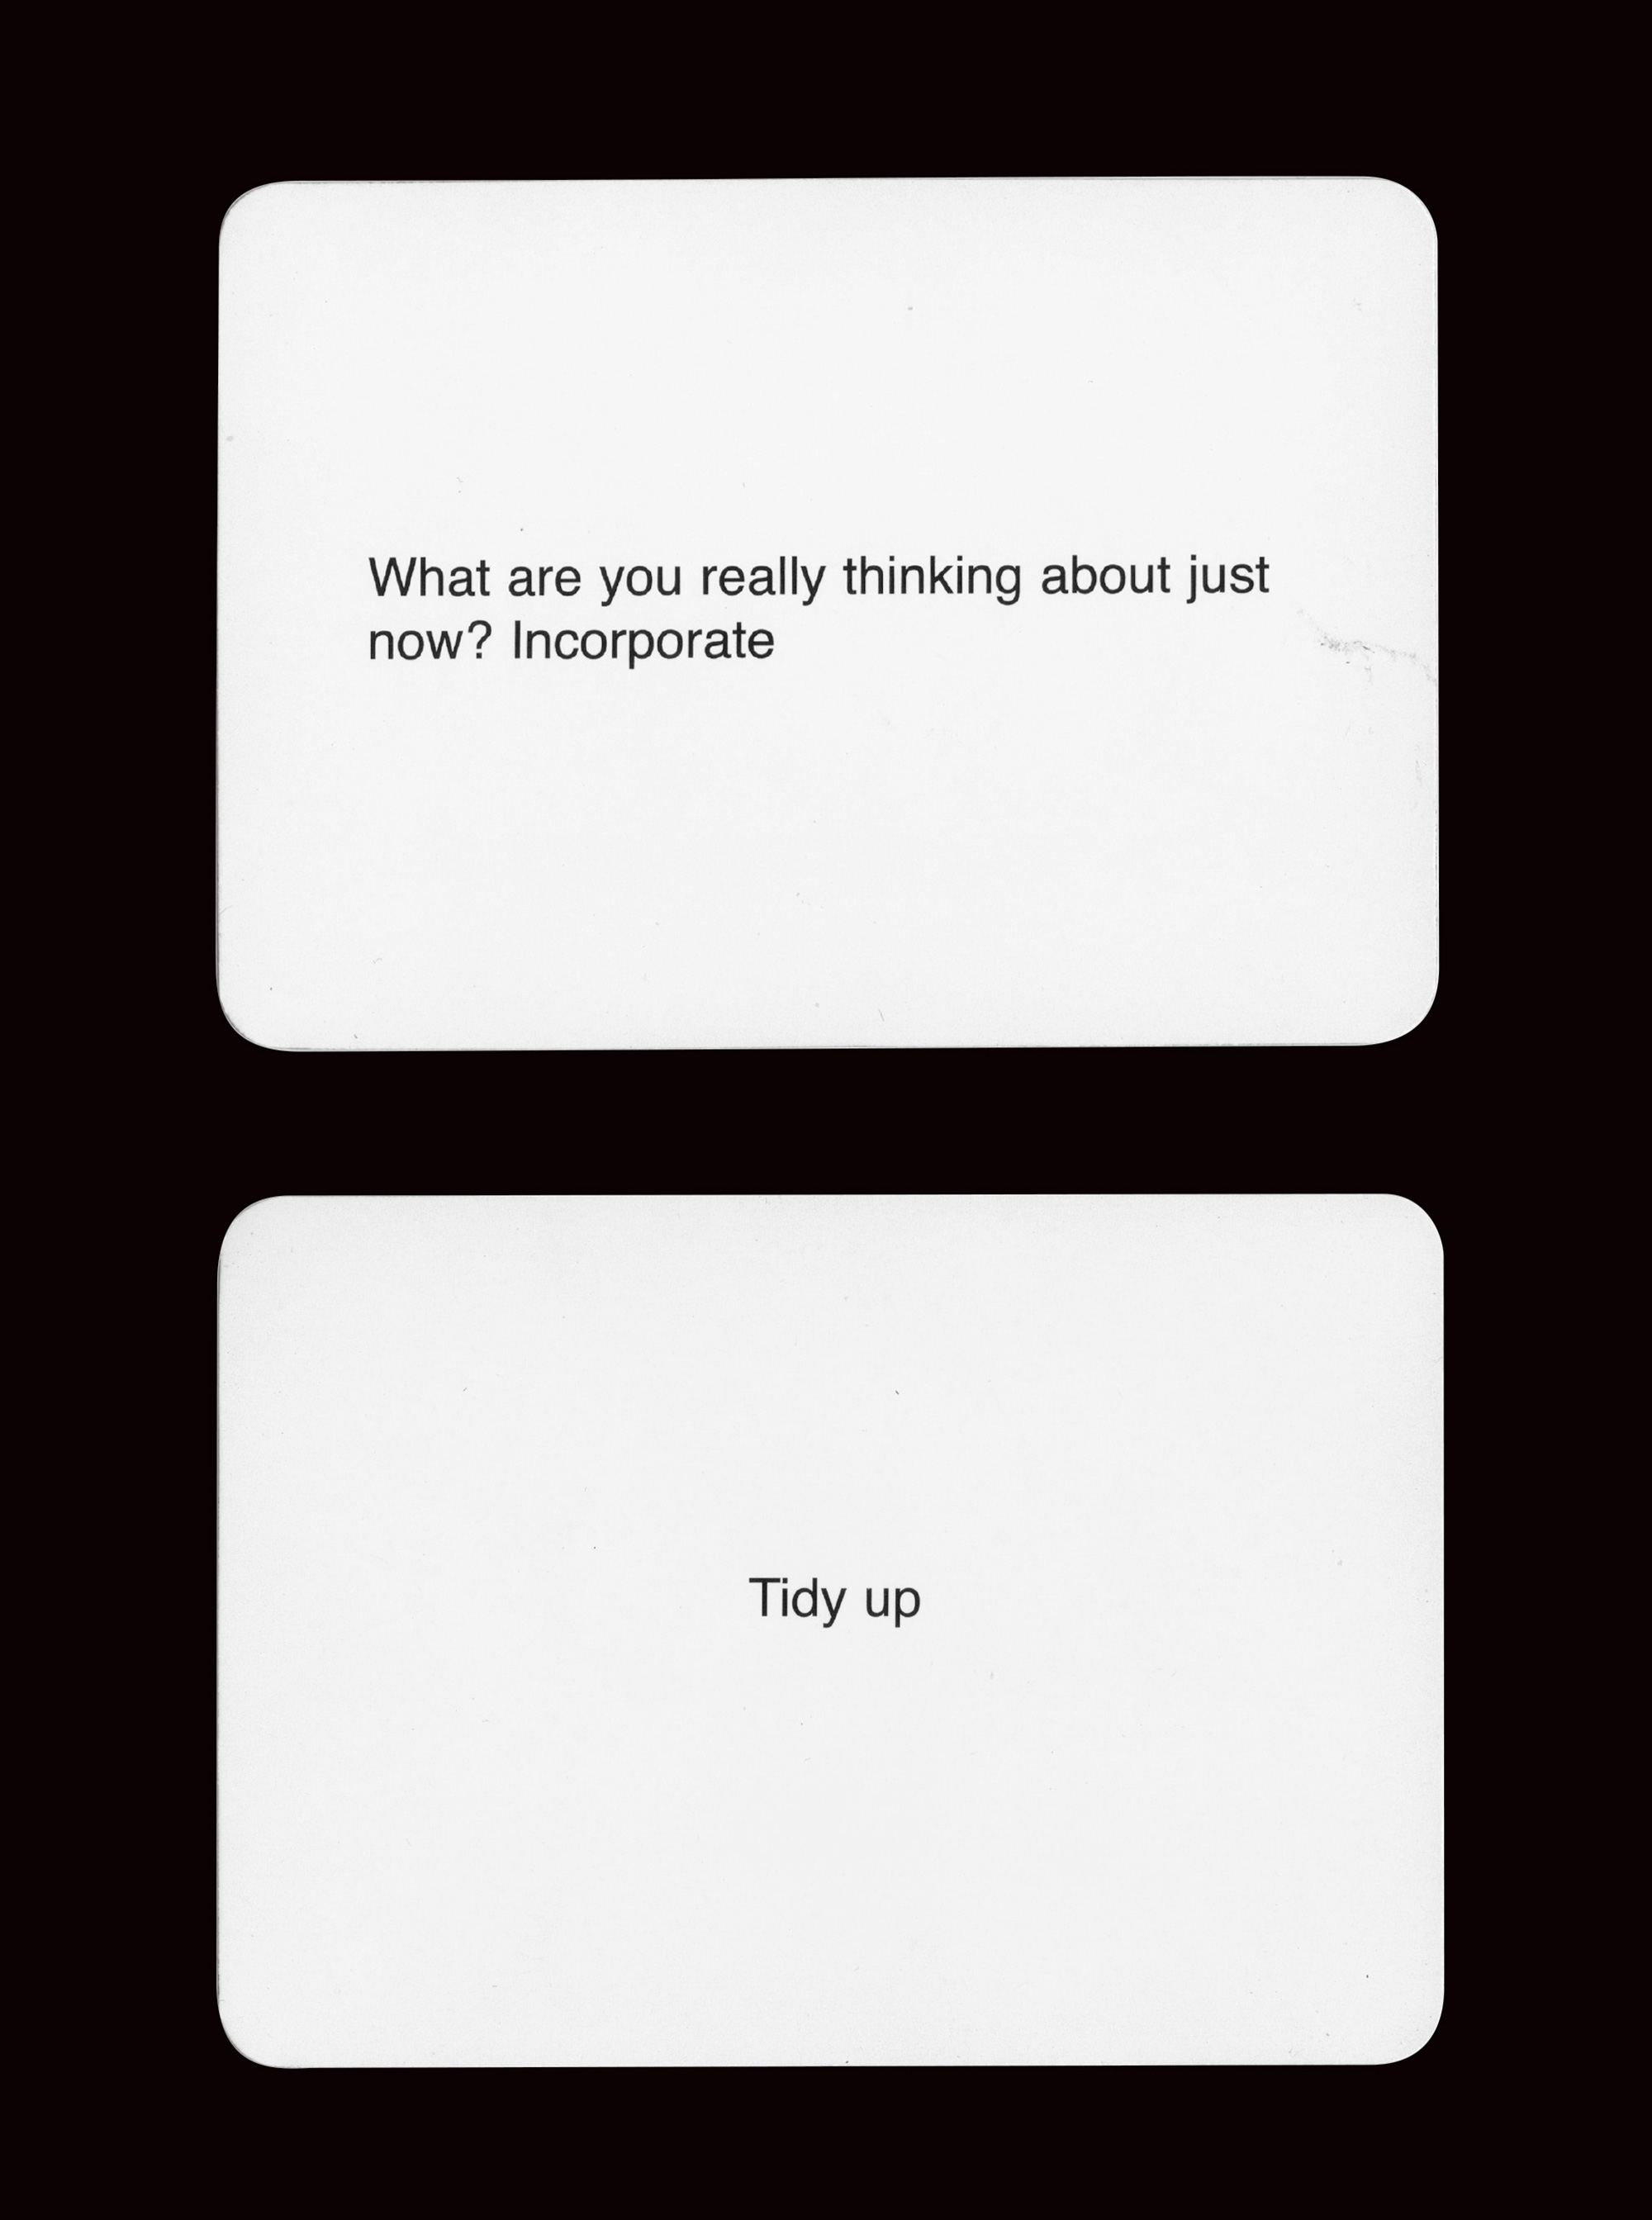 Cards from the two thousand and one edition of Brian Eno and Peter Schmidt’s nineteen seventy-five “Oblique Strategies” set. They read “What are you really thinking about now? Incorporate” and “Tidy up.”